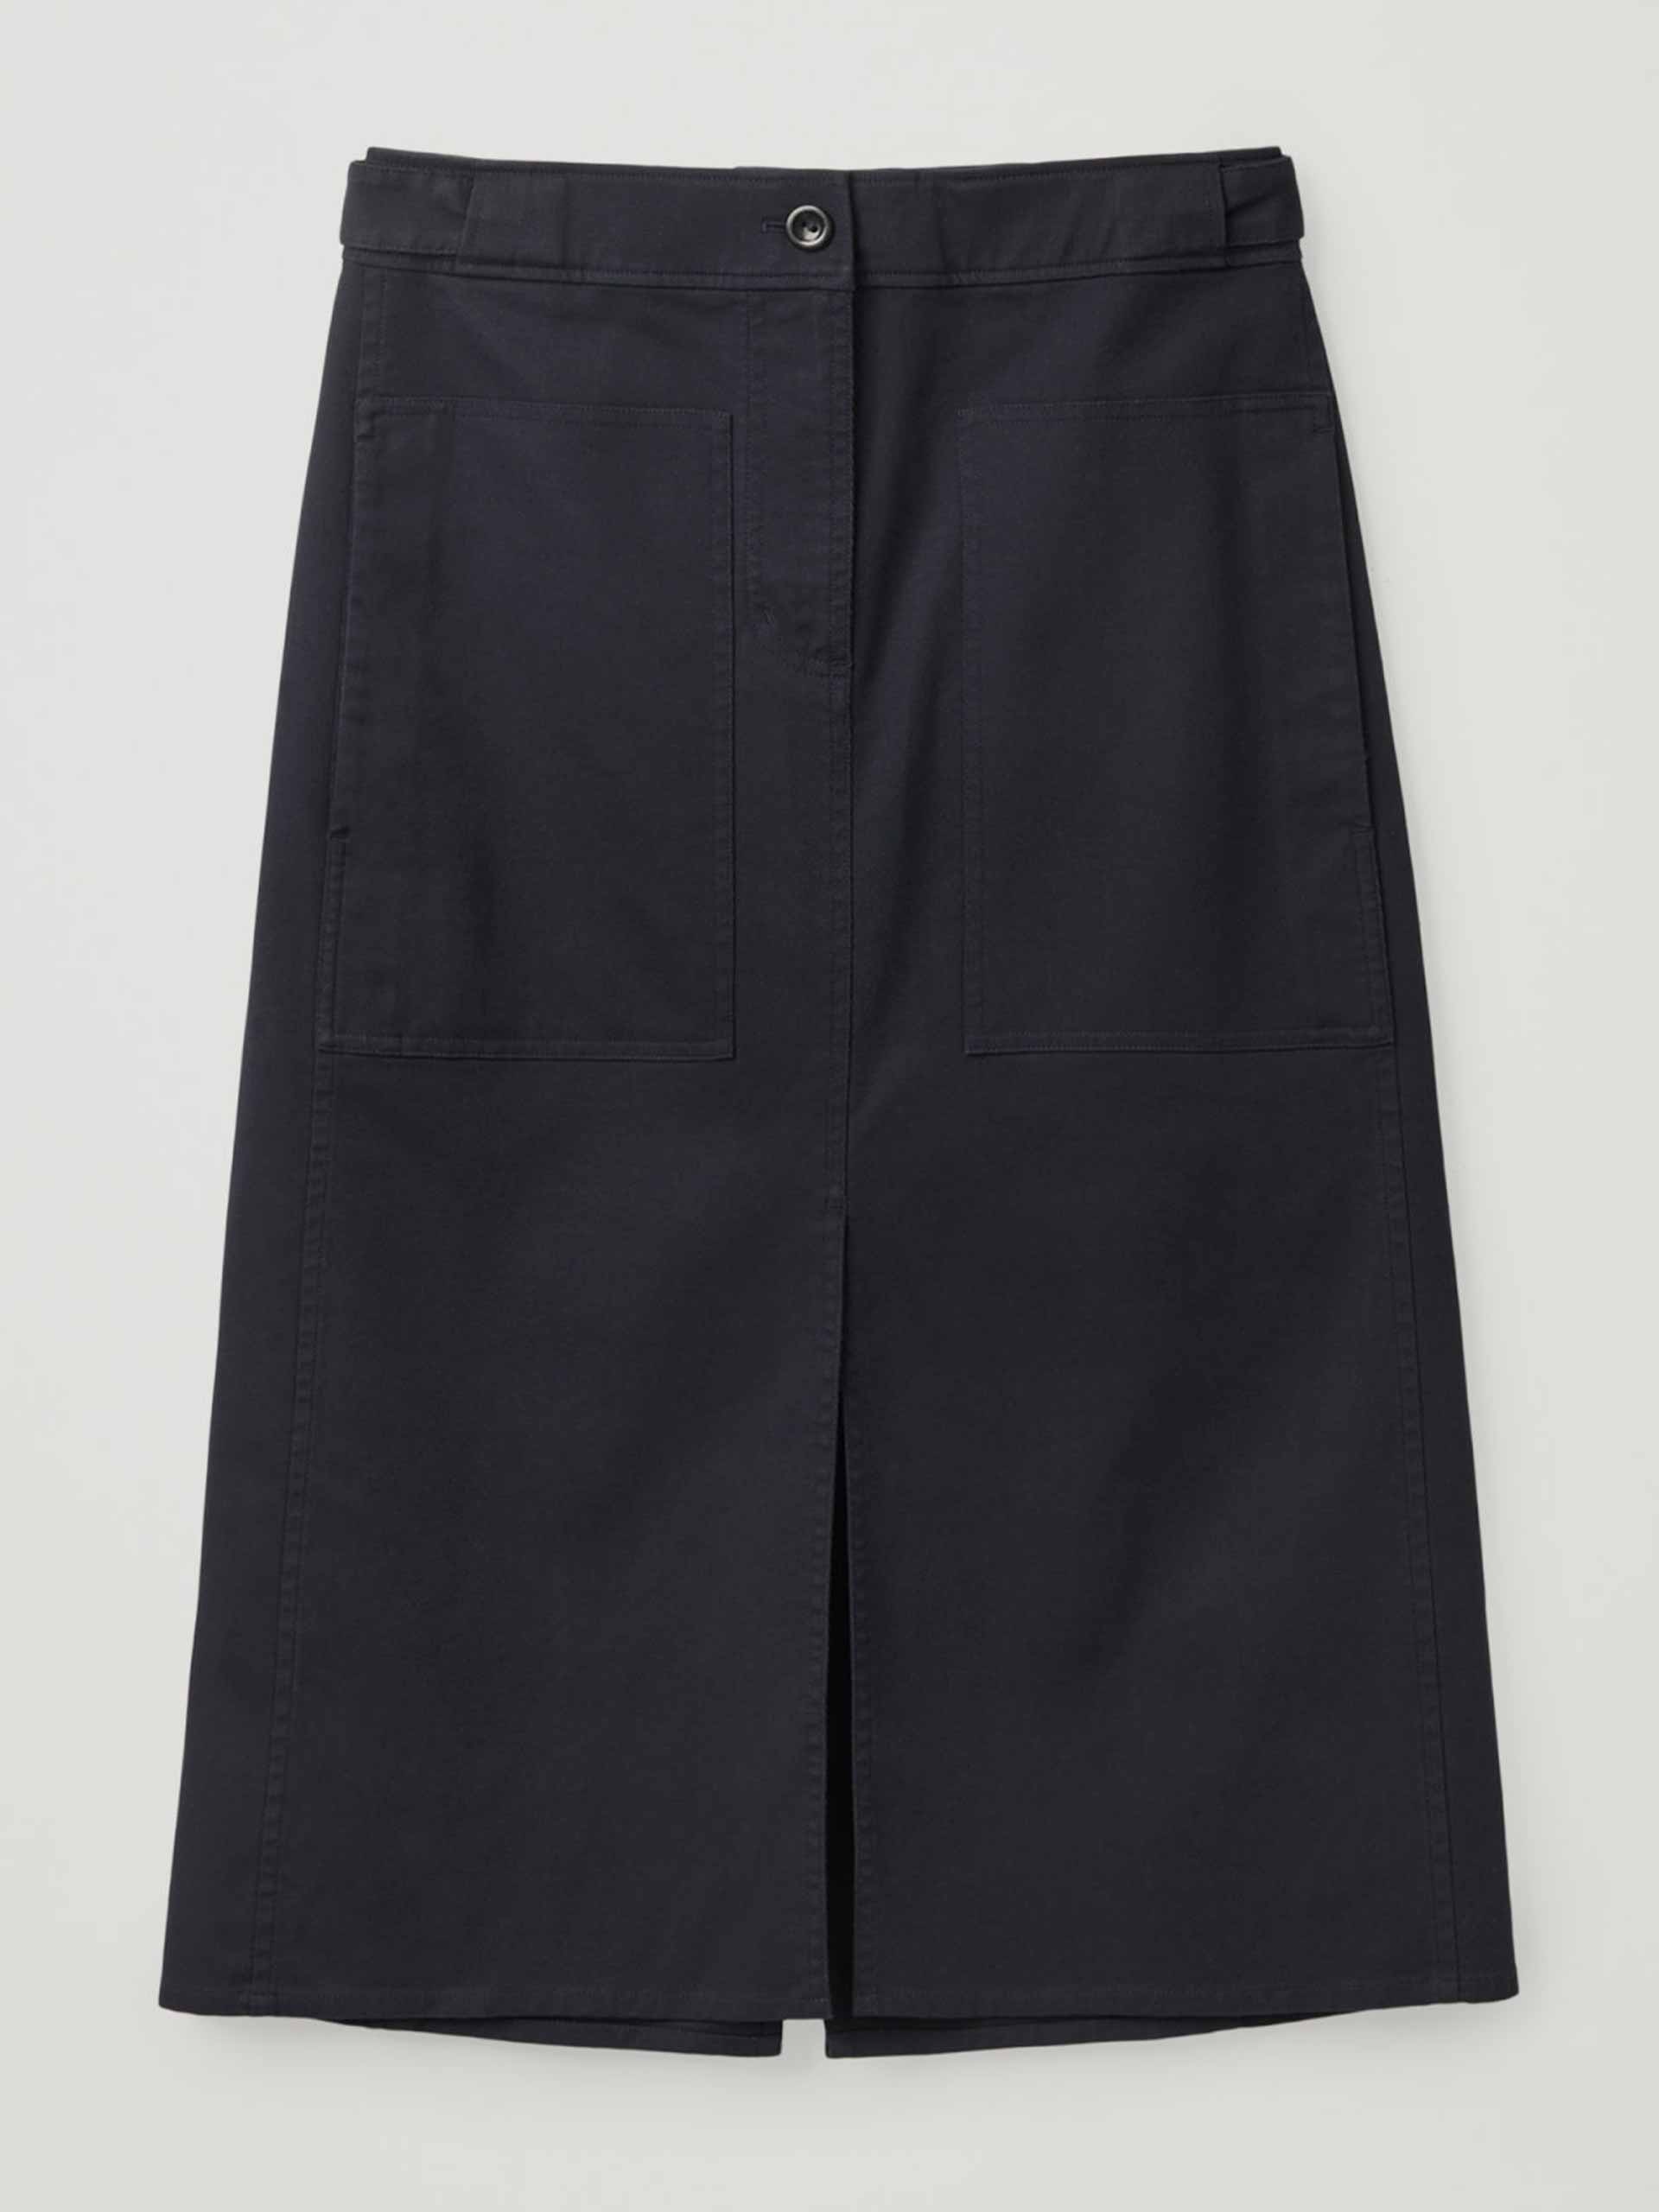 Organic cotton utility skirt | Collagerie.com